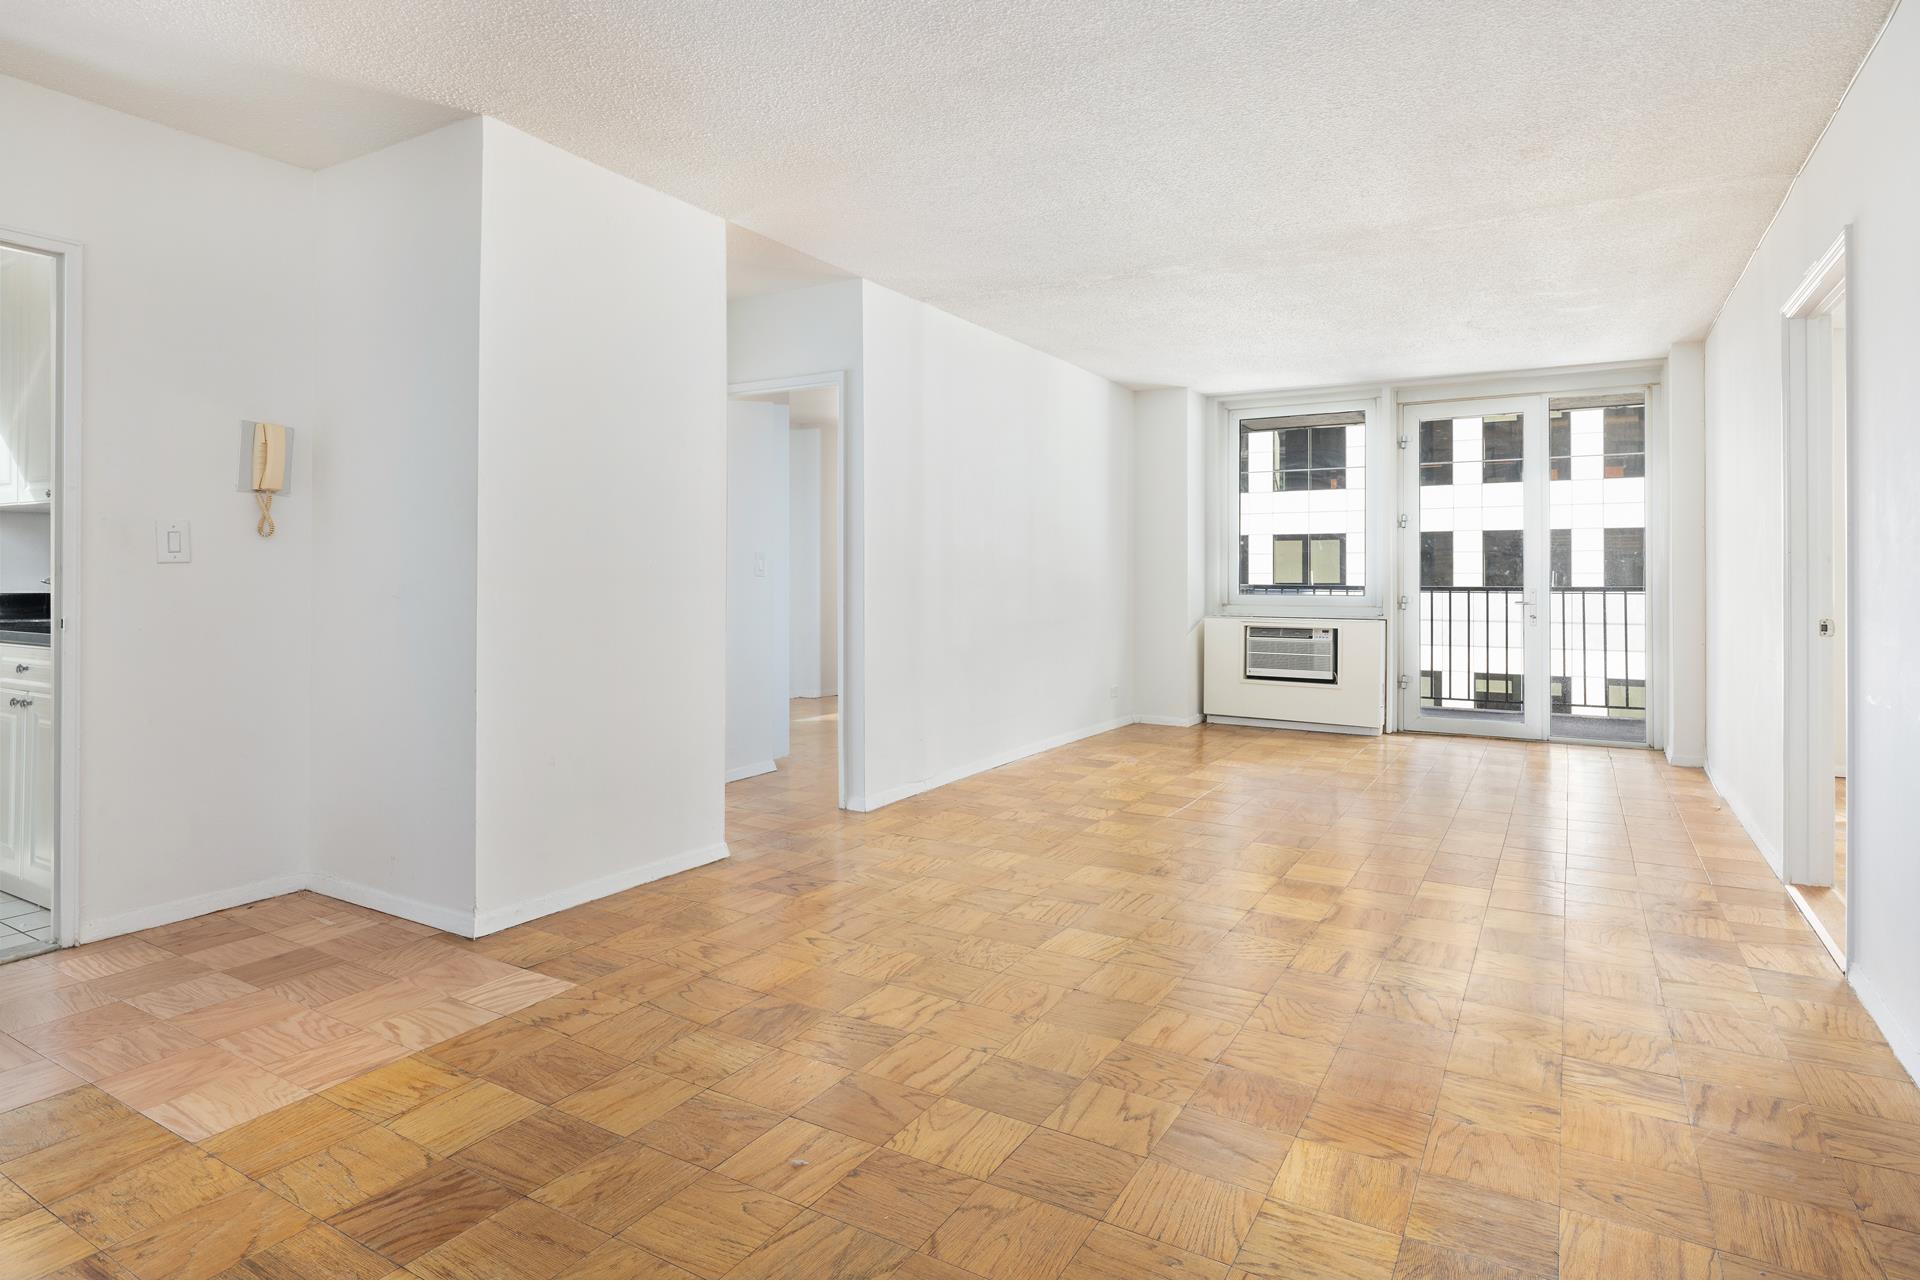 230 West 55th Street 902, Chelsea And Clinton, Downtown, NYC - 3 Bedrooms  
2 Bathrooms  
5 Rooms - 